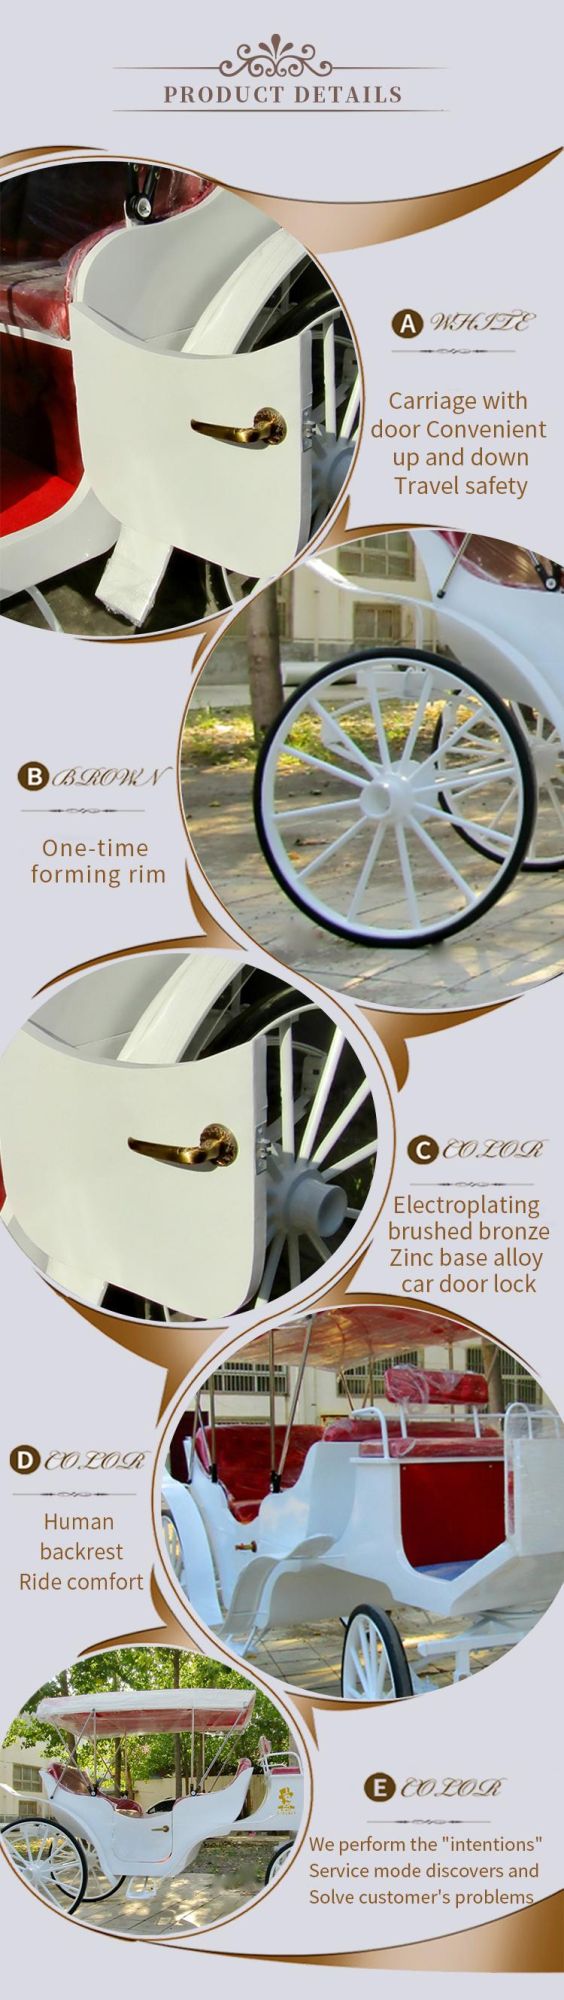 Princess White Pumpkin Wedding Horse Drawn Carriage Wedding Buggy Carriage for Sale